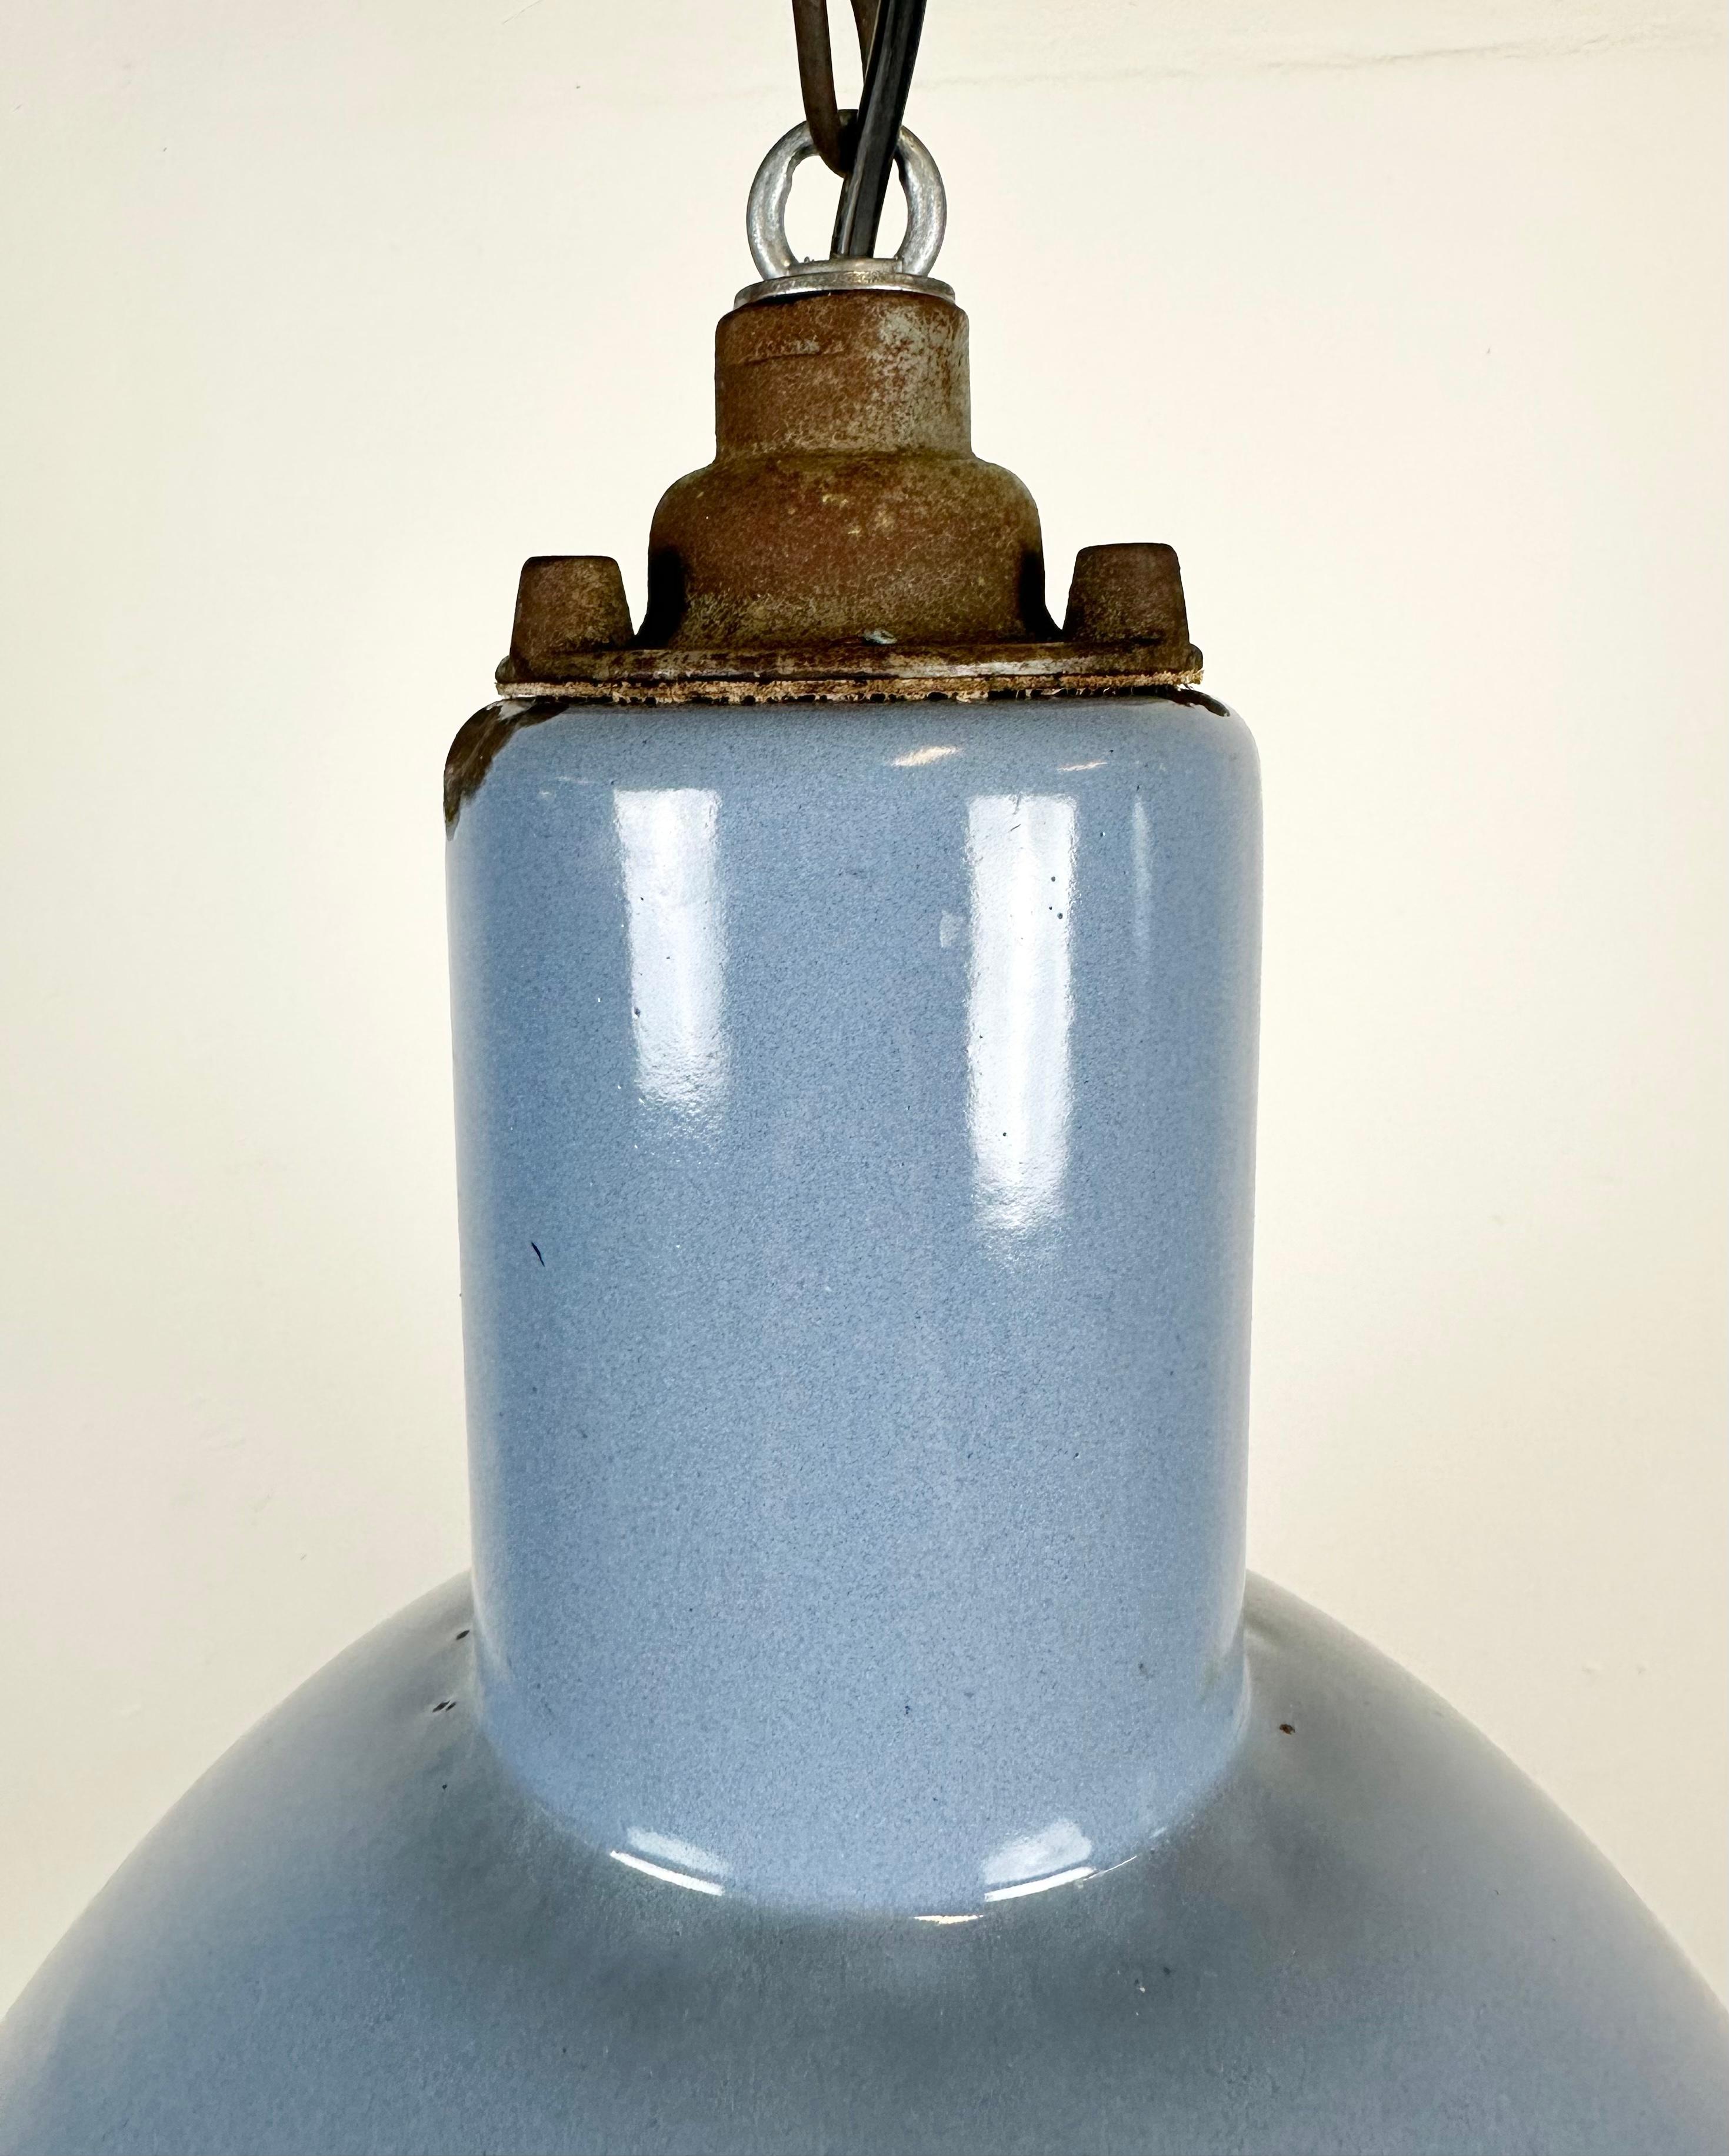 Bauhaus Blue Enamel Industrial Pendant Lamp, 1950s In Good Condition For Sale In Kojetice, CZ